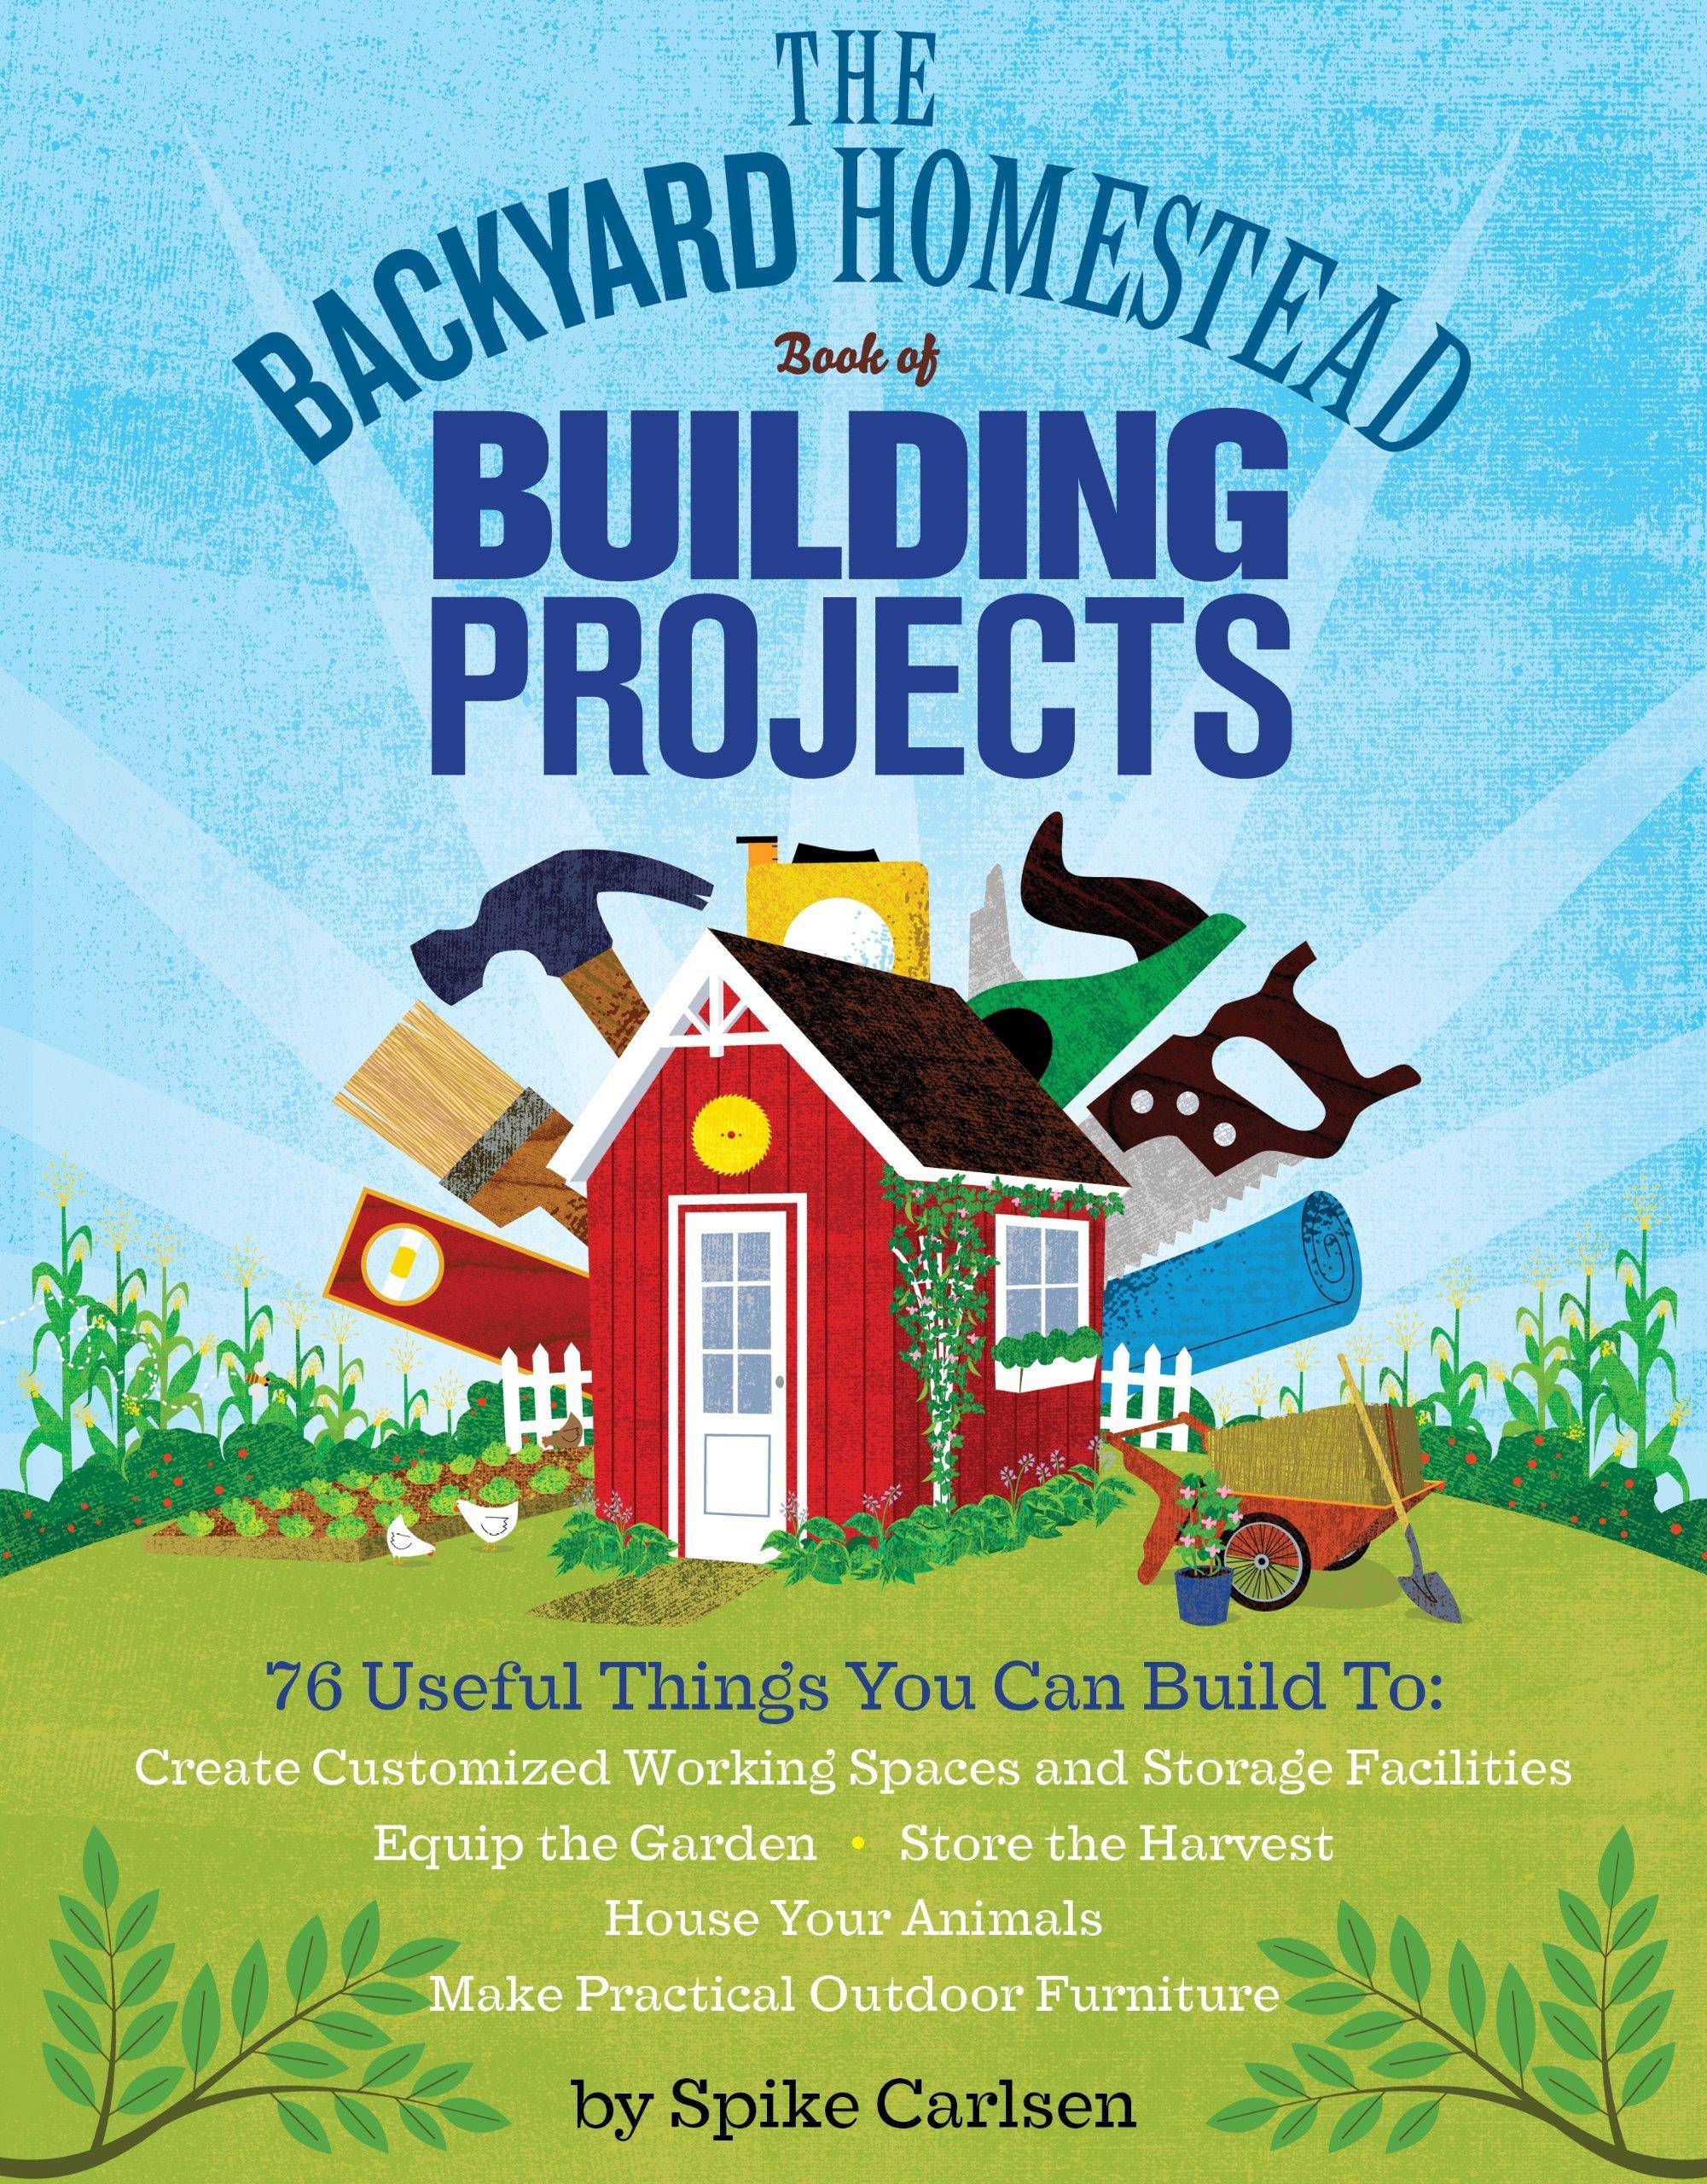 The Backyard Homestead Book of Building Projects - SureShot Books Publishing LLC